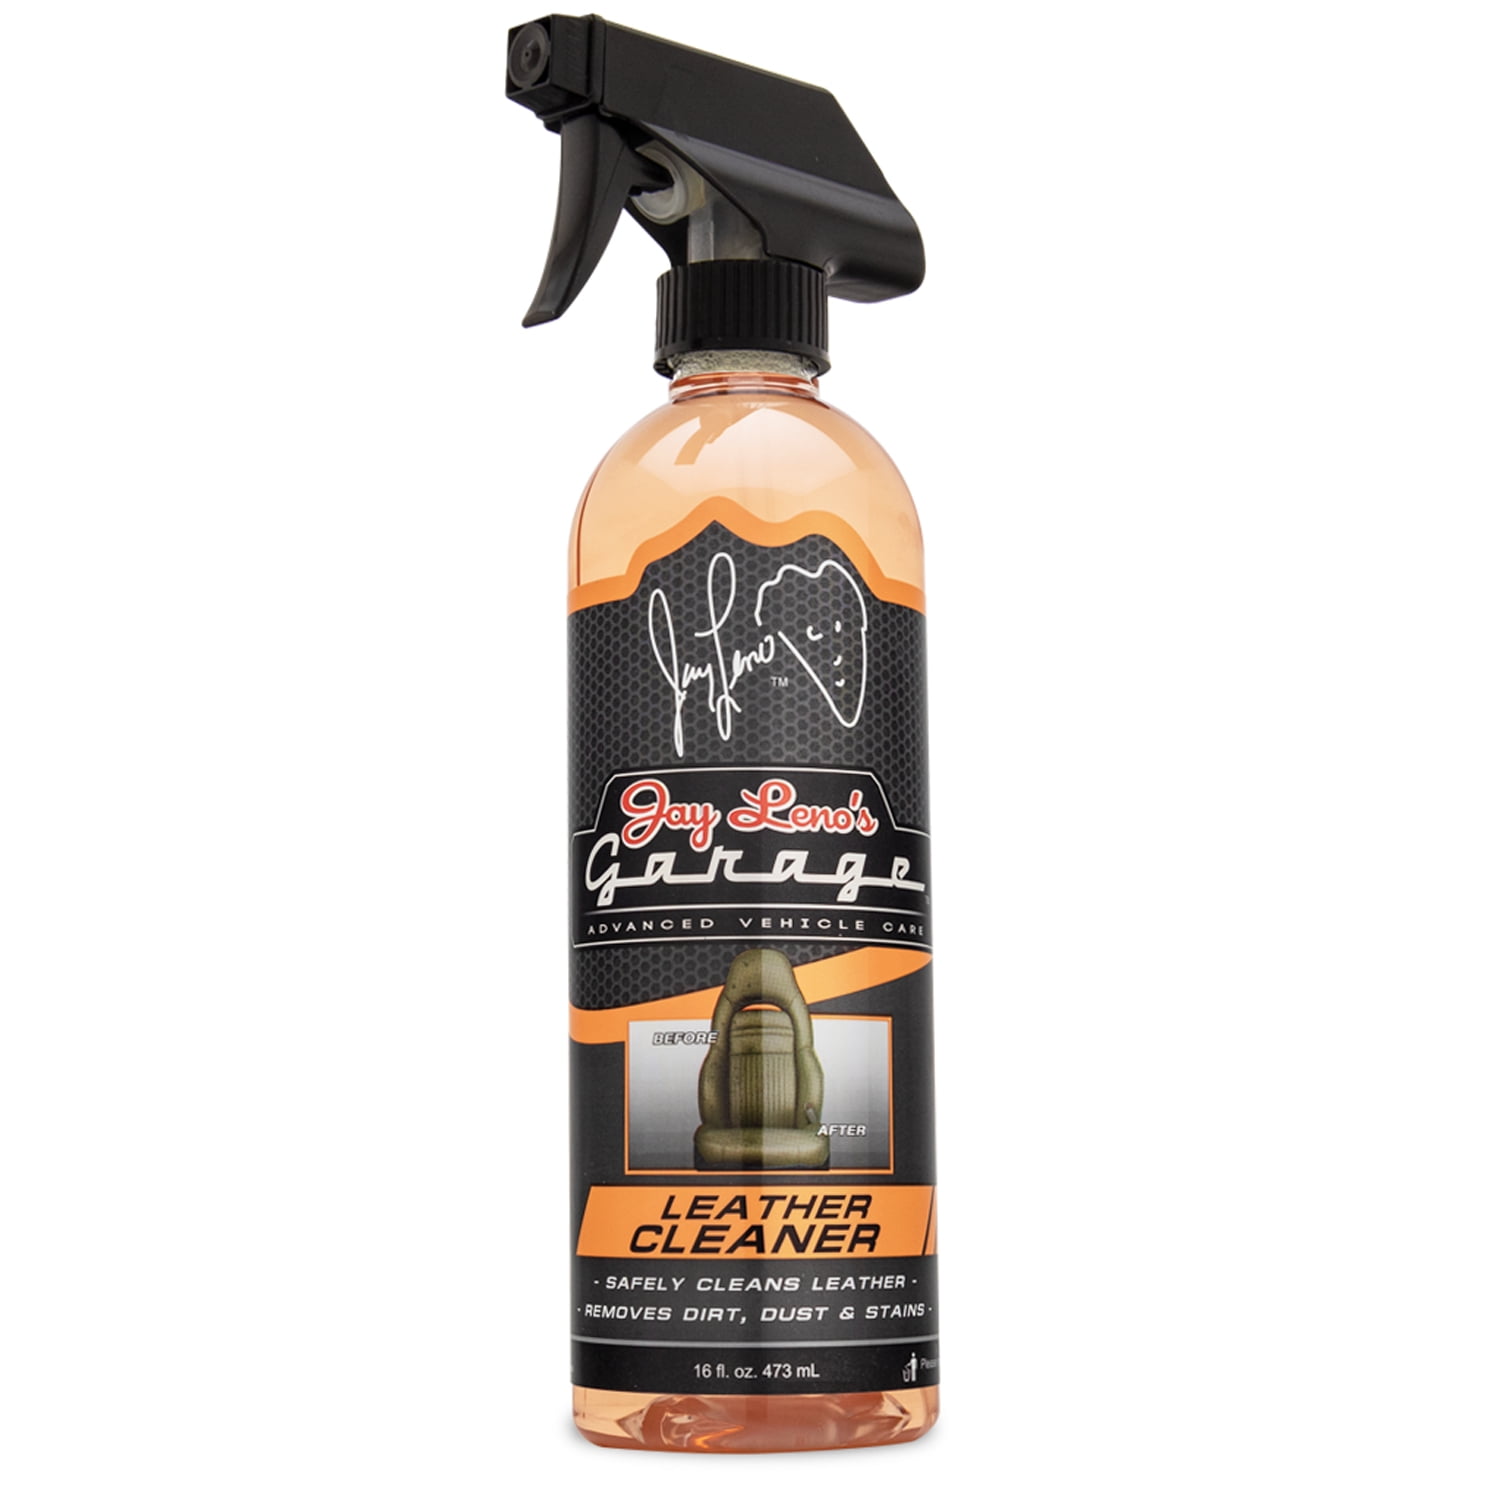 Mothers Leather Cleaner, Car Leather Cleaner Spray, 12 oz.